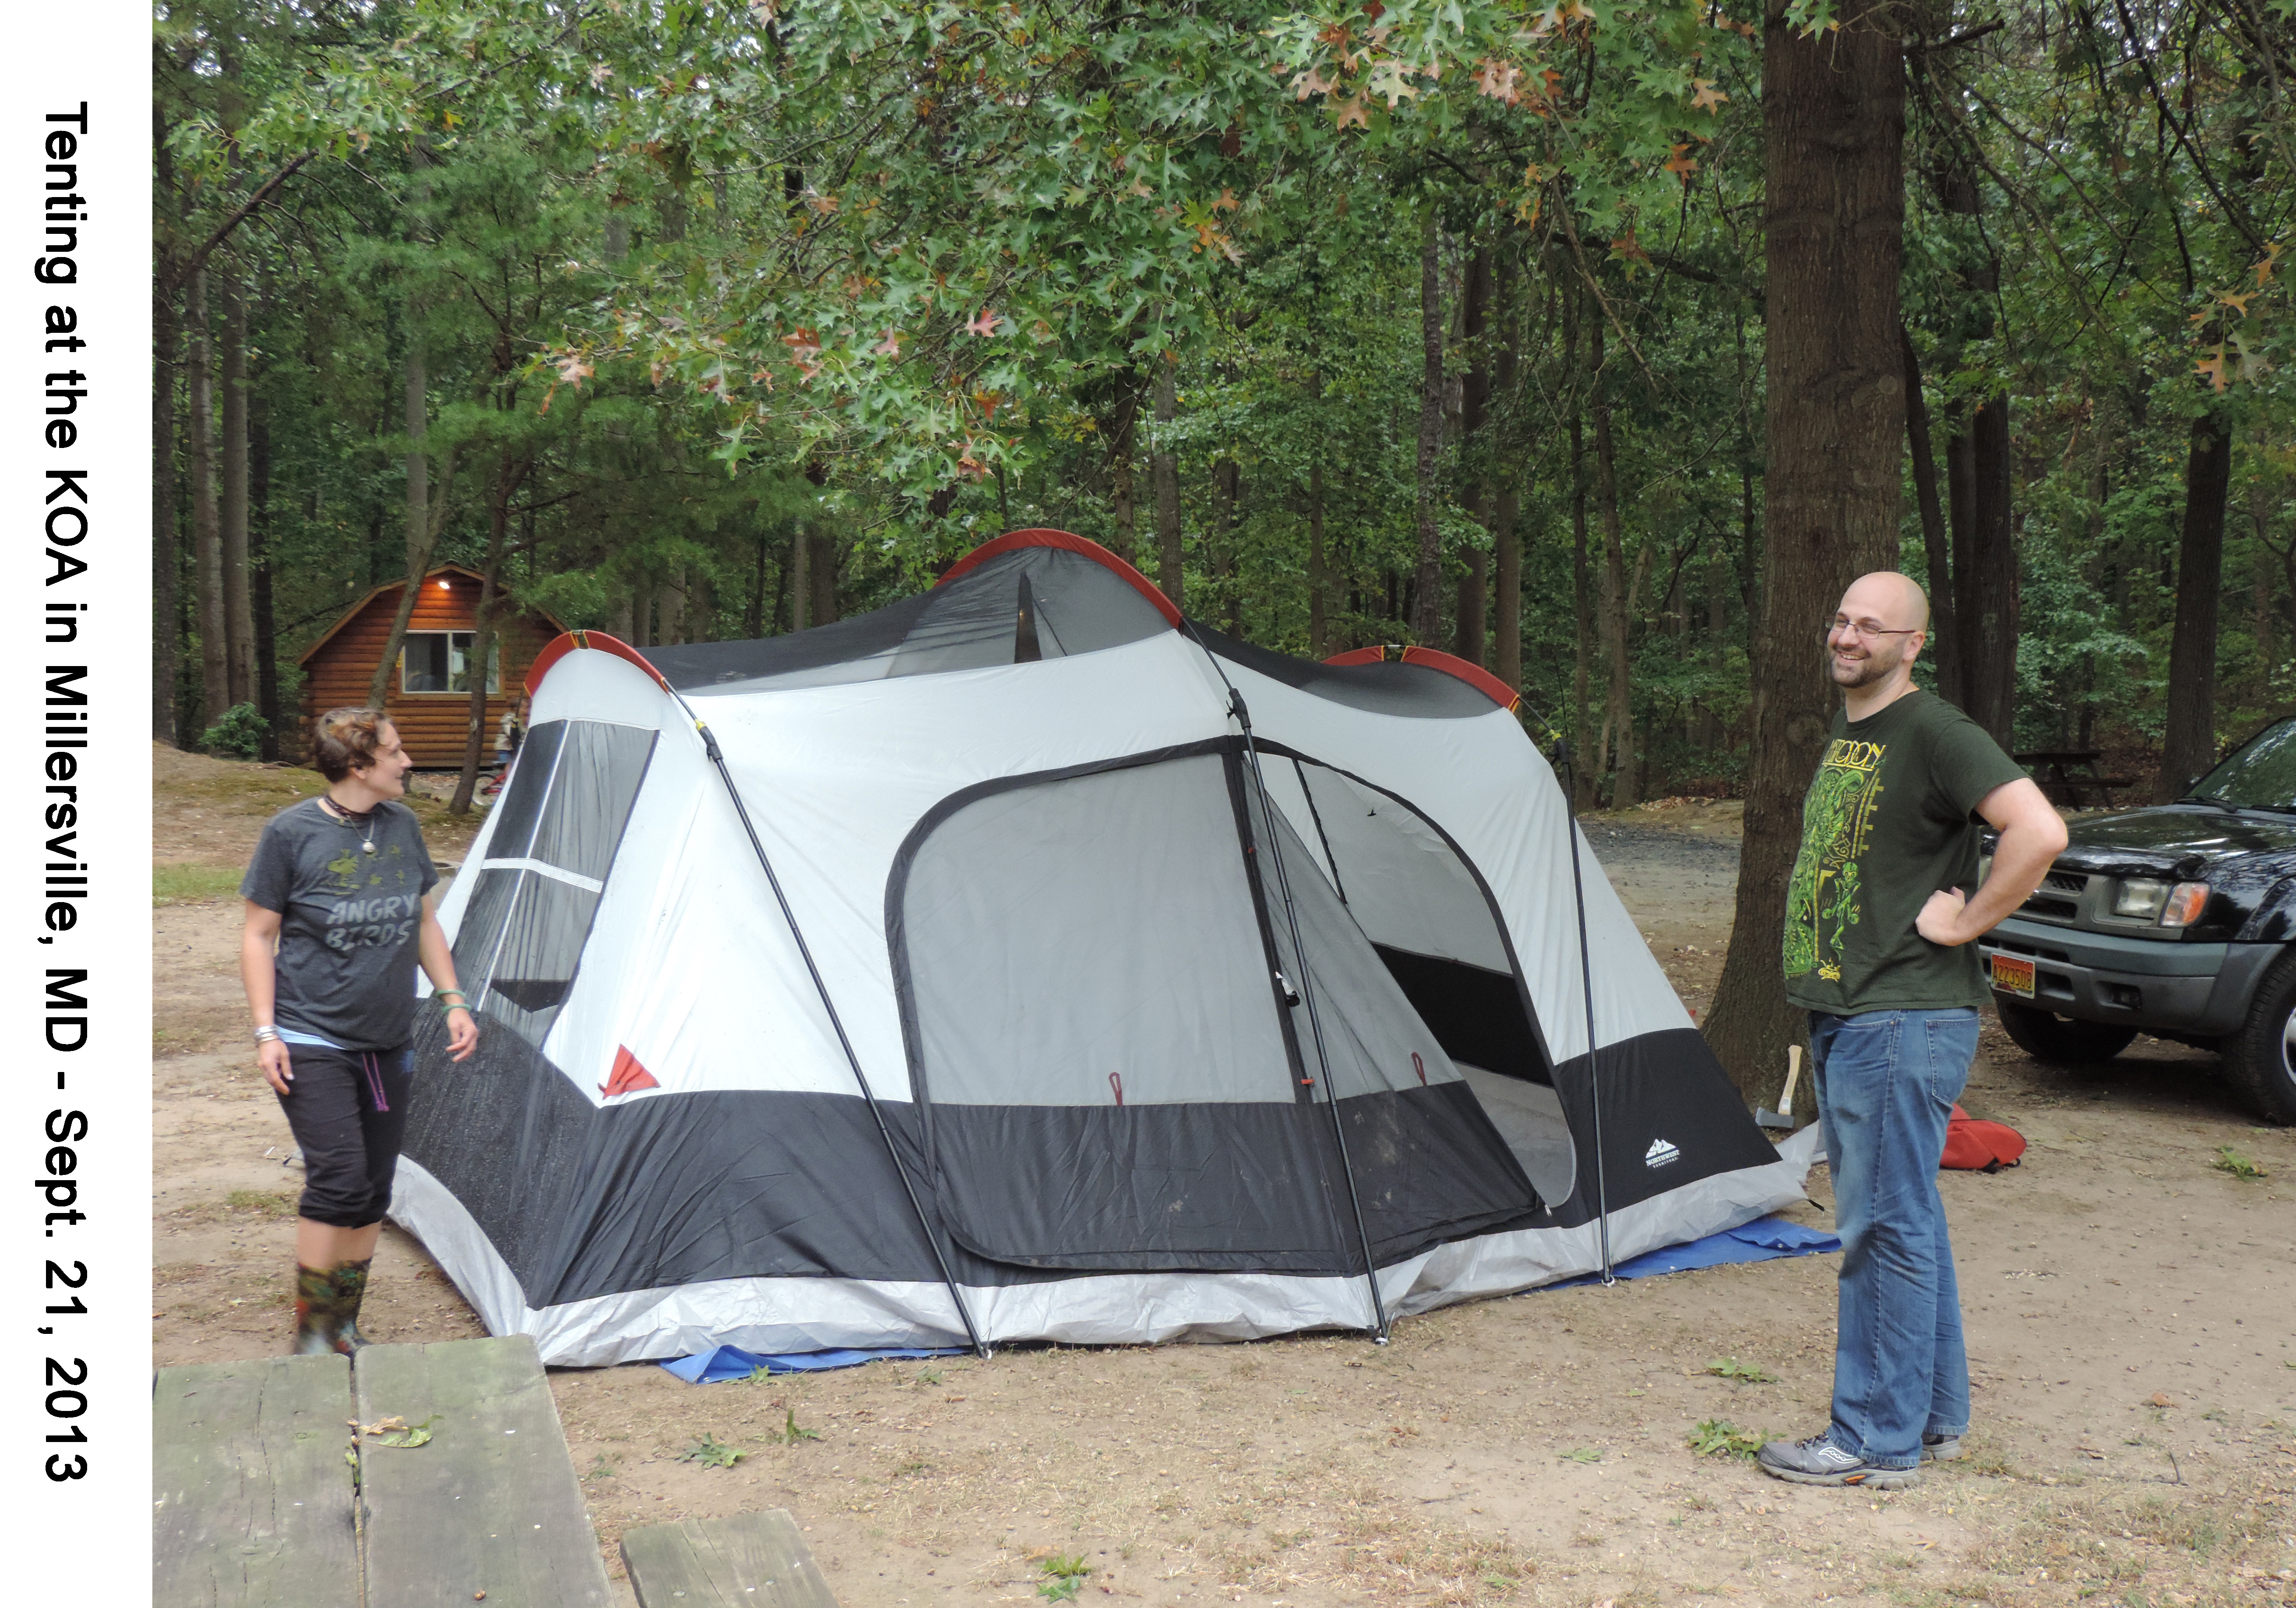 Lisa and Doug flank their newly erected family tent